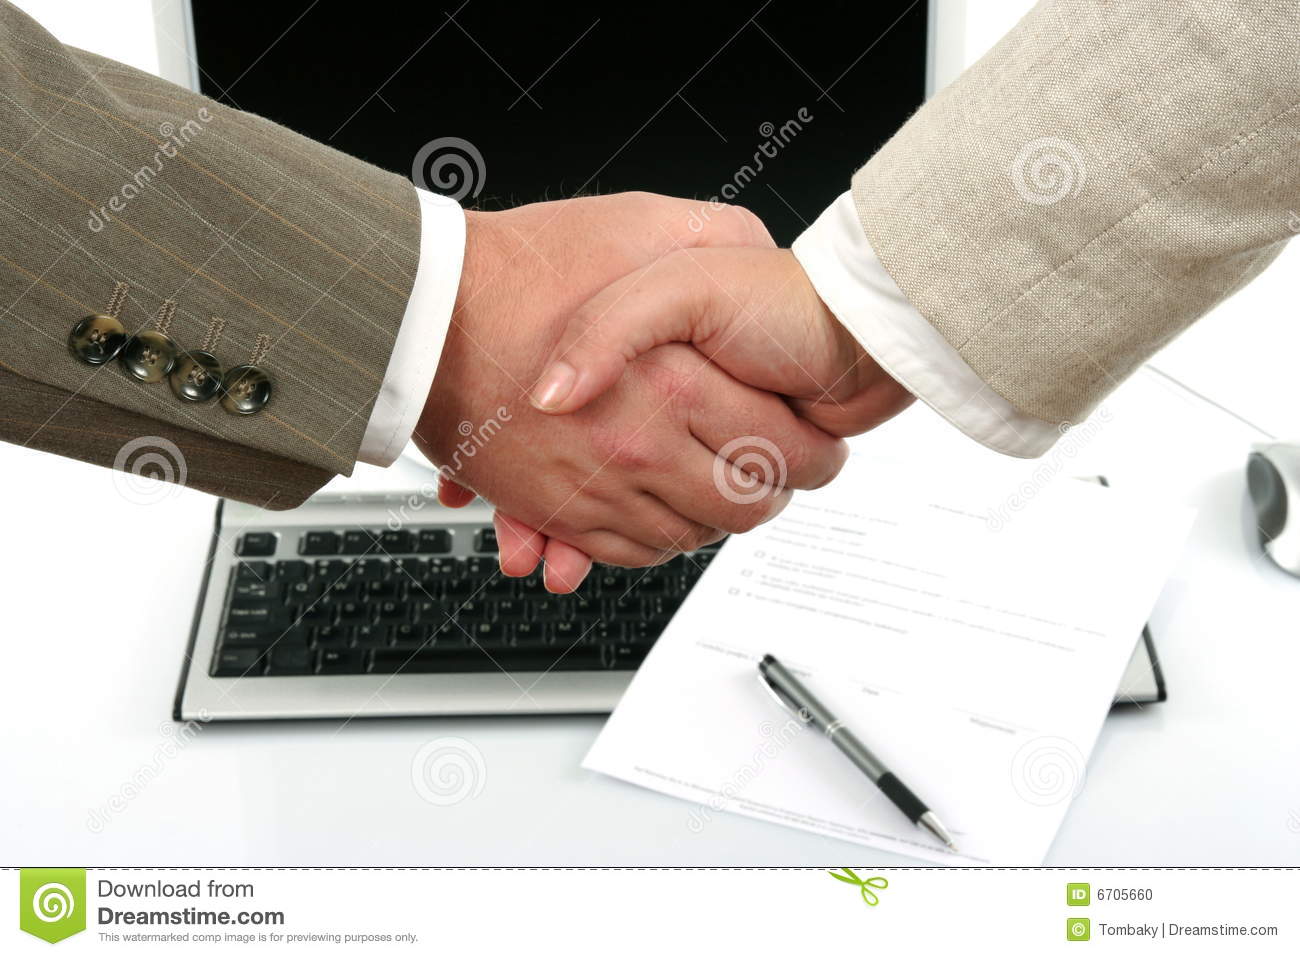 Man And Woman Shaking Hands In Front Of Computer And Document With Pen